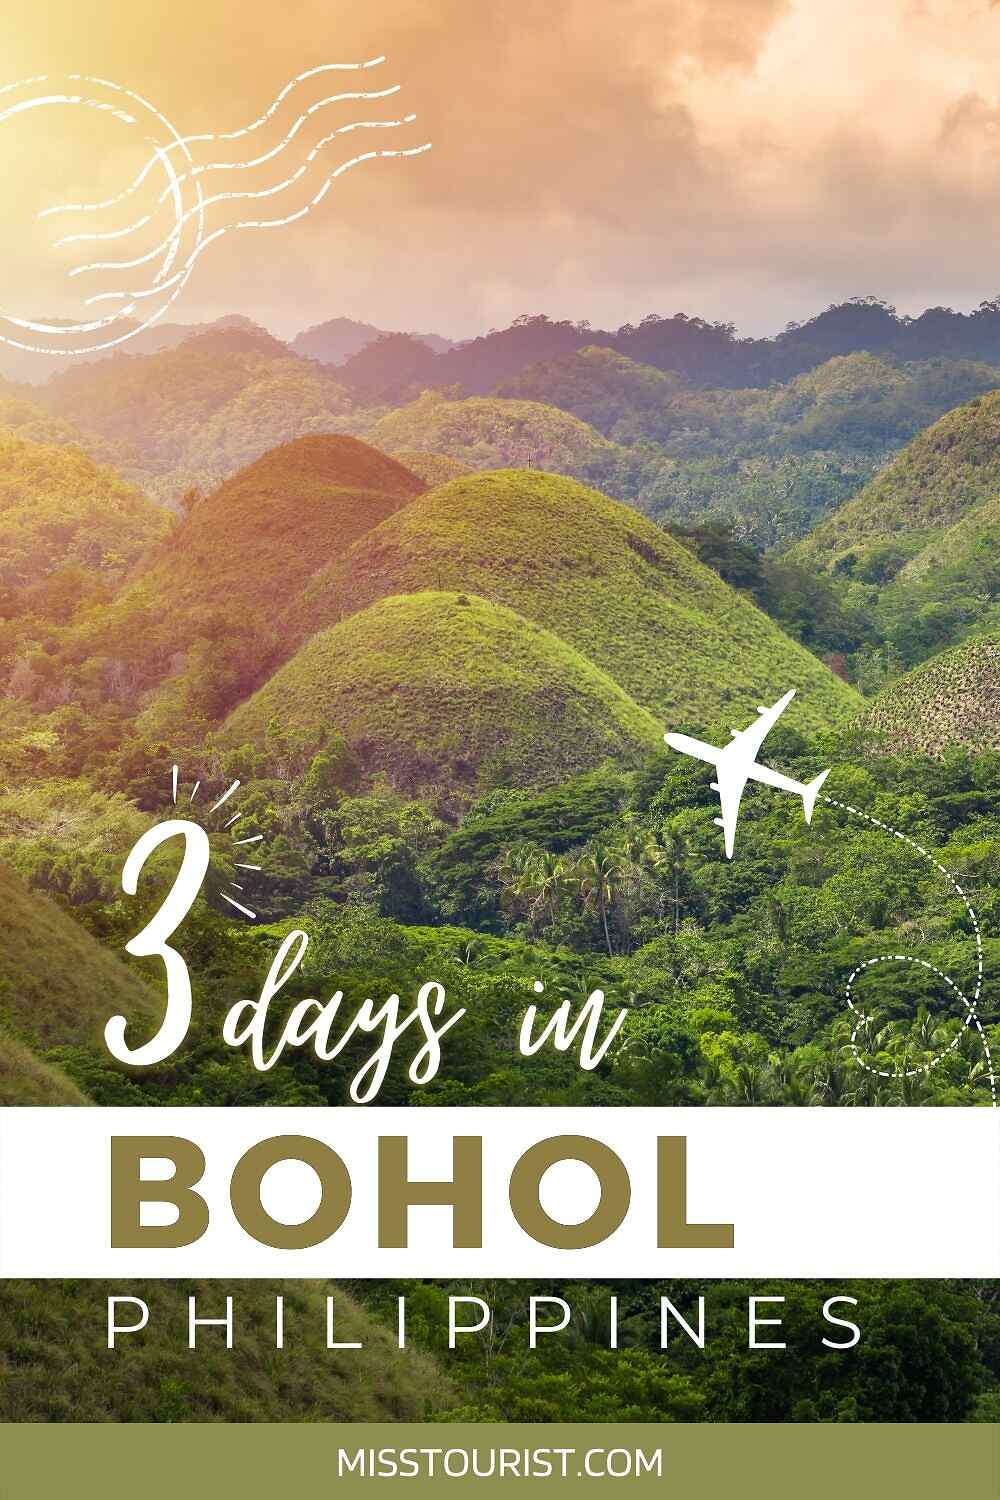 3 days in bohol philippines pin 1